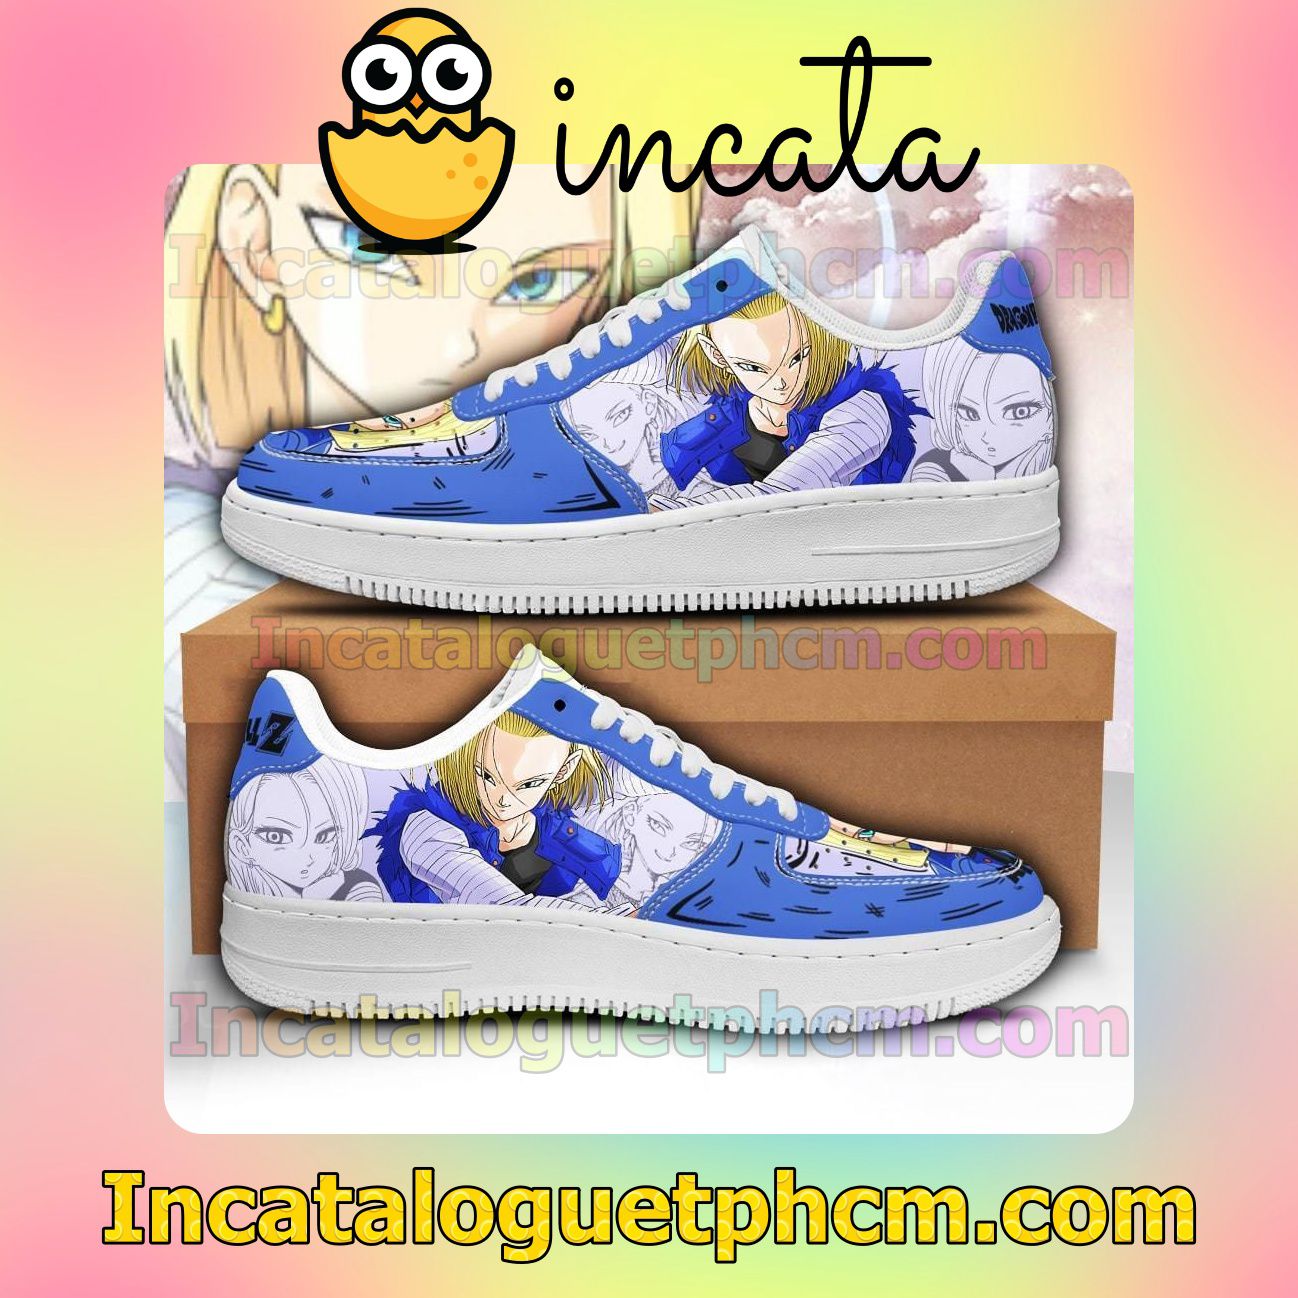 Android 18 Dragon Ball Anime Nike Low Shoes Sneakers